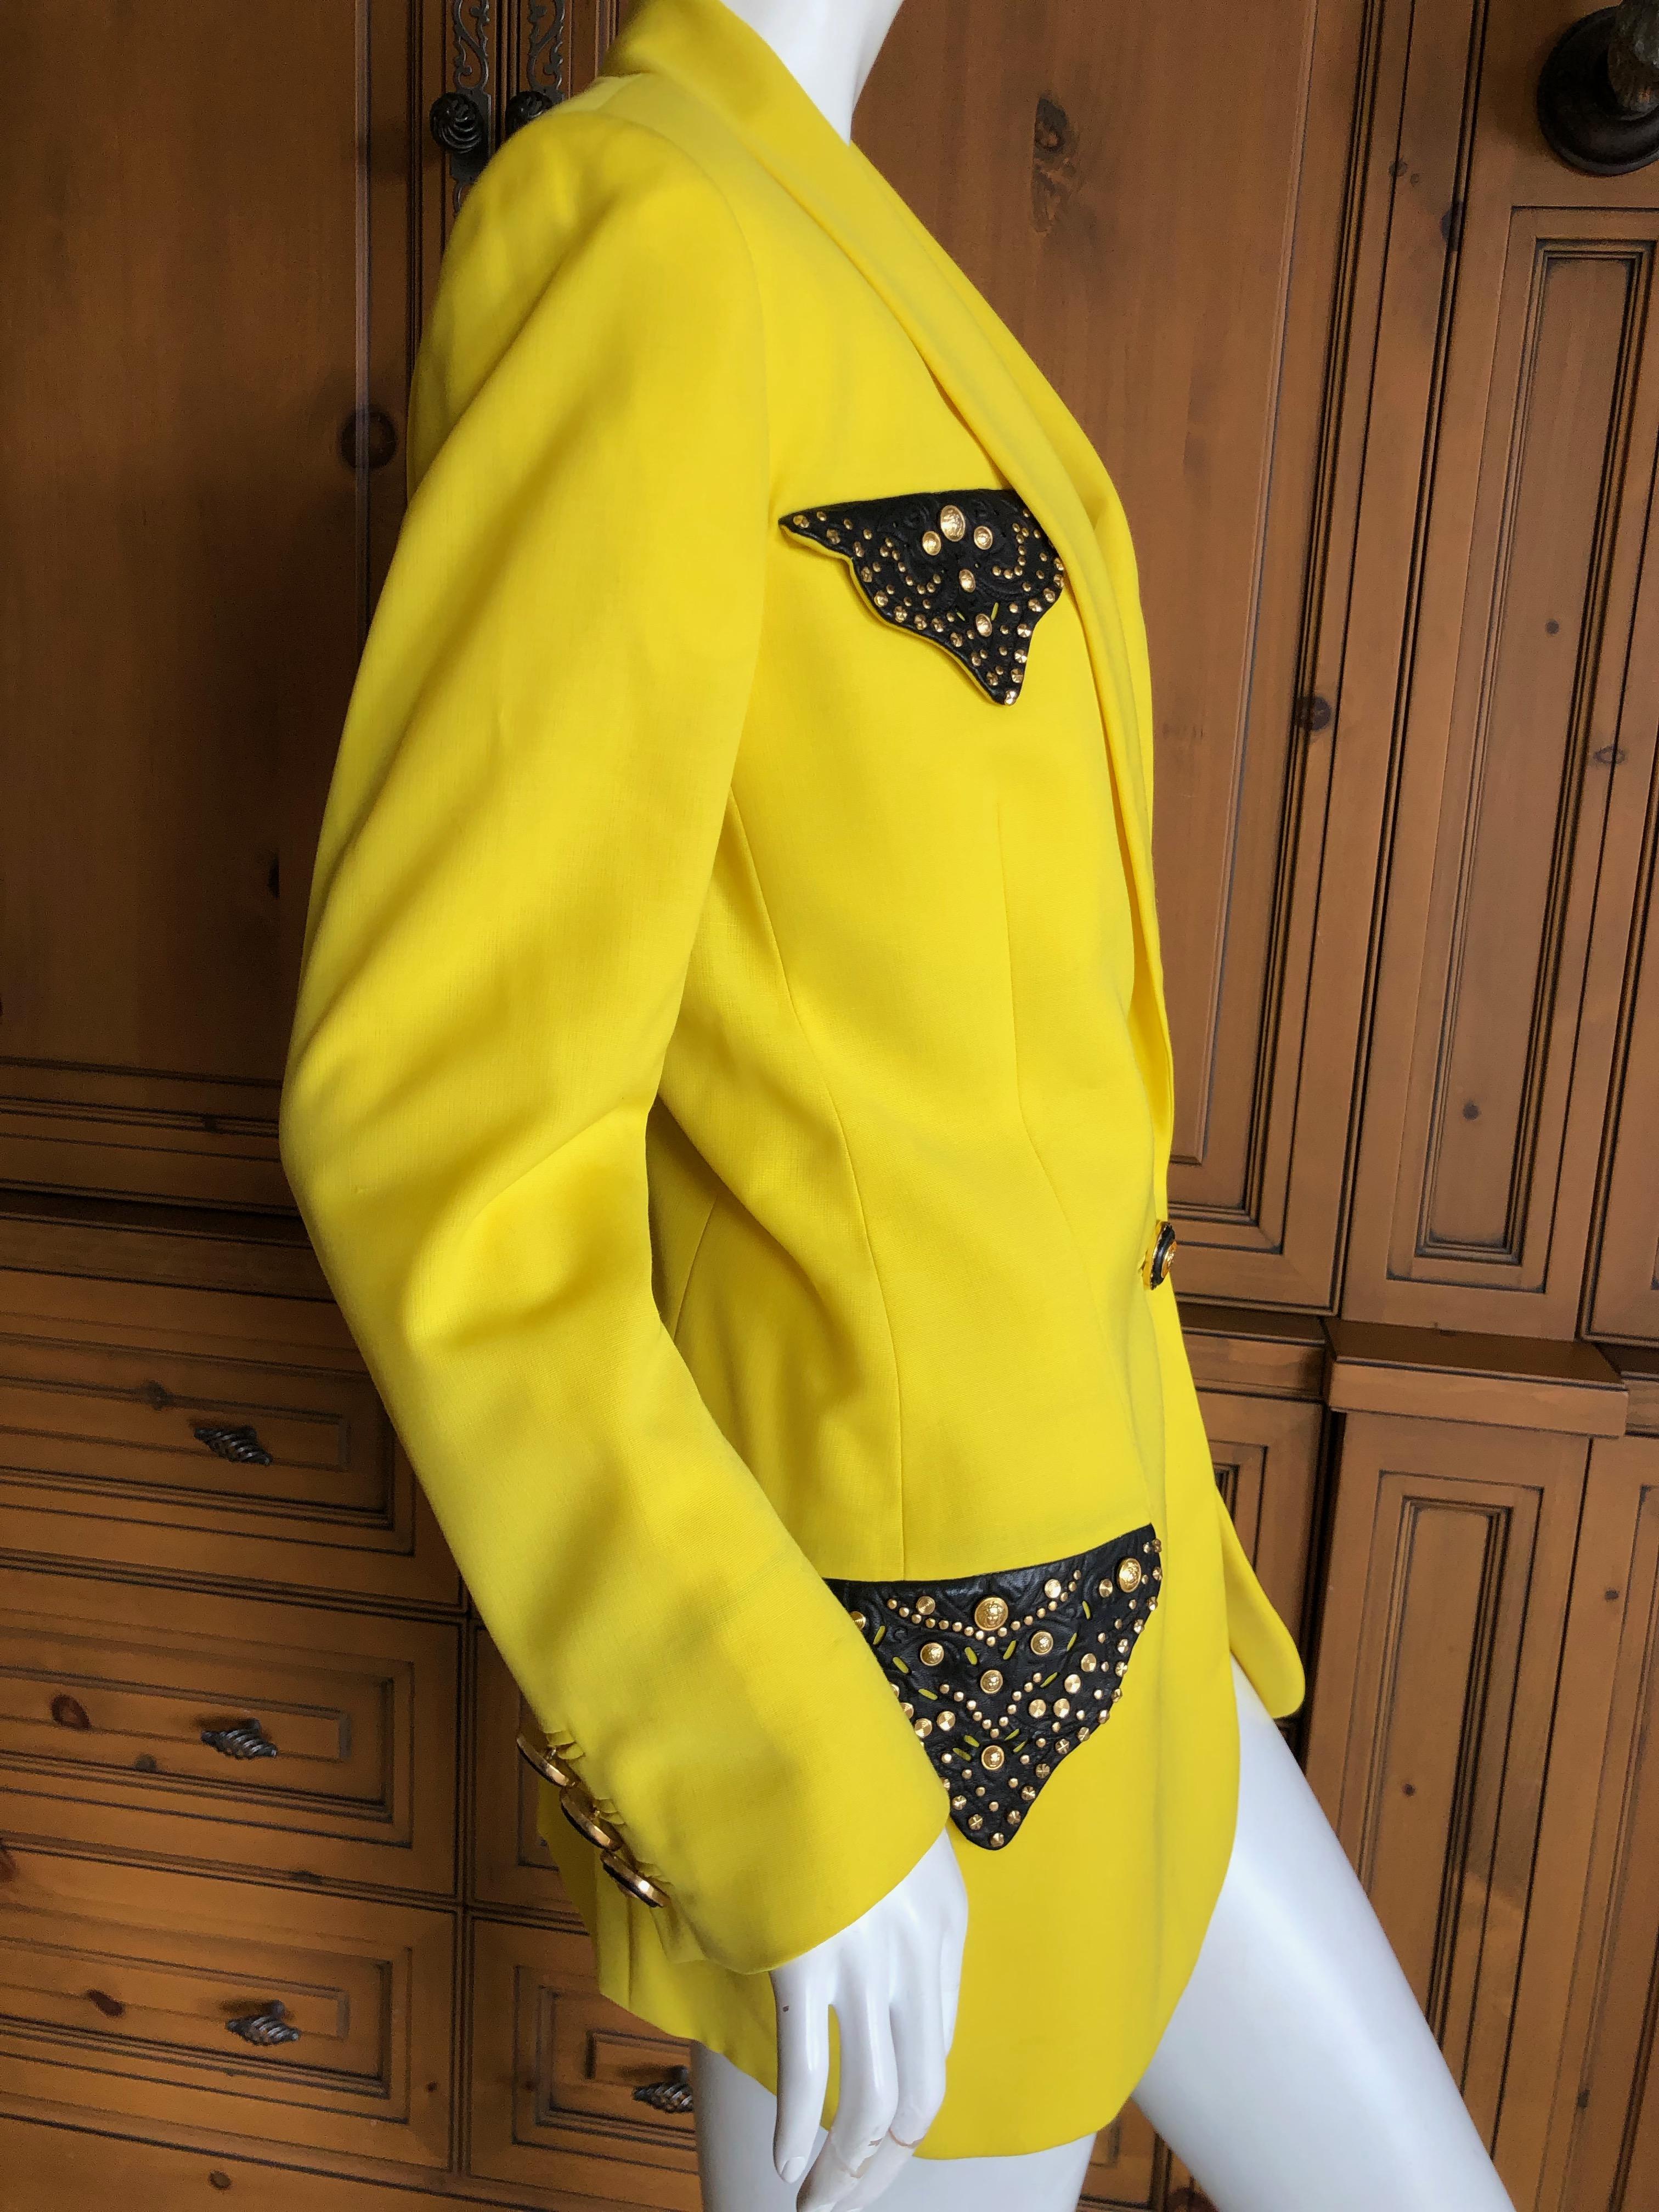 Gianni Versace Iconic Fall 1992 Screaming Yellow Jacket with Leather Details For Sale 4